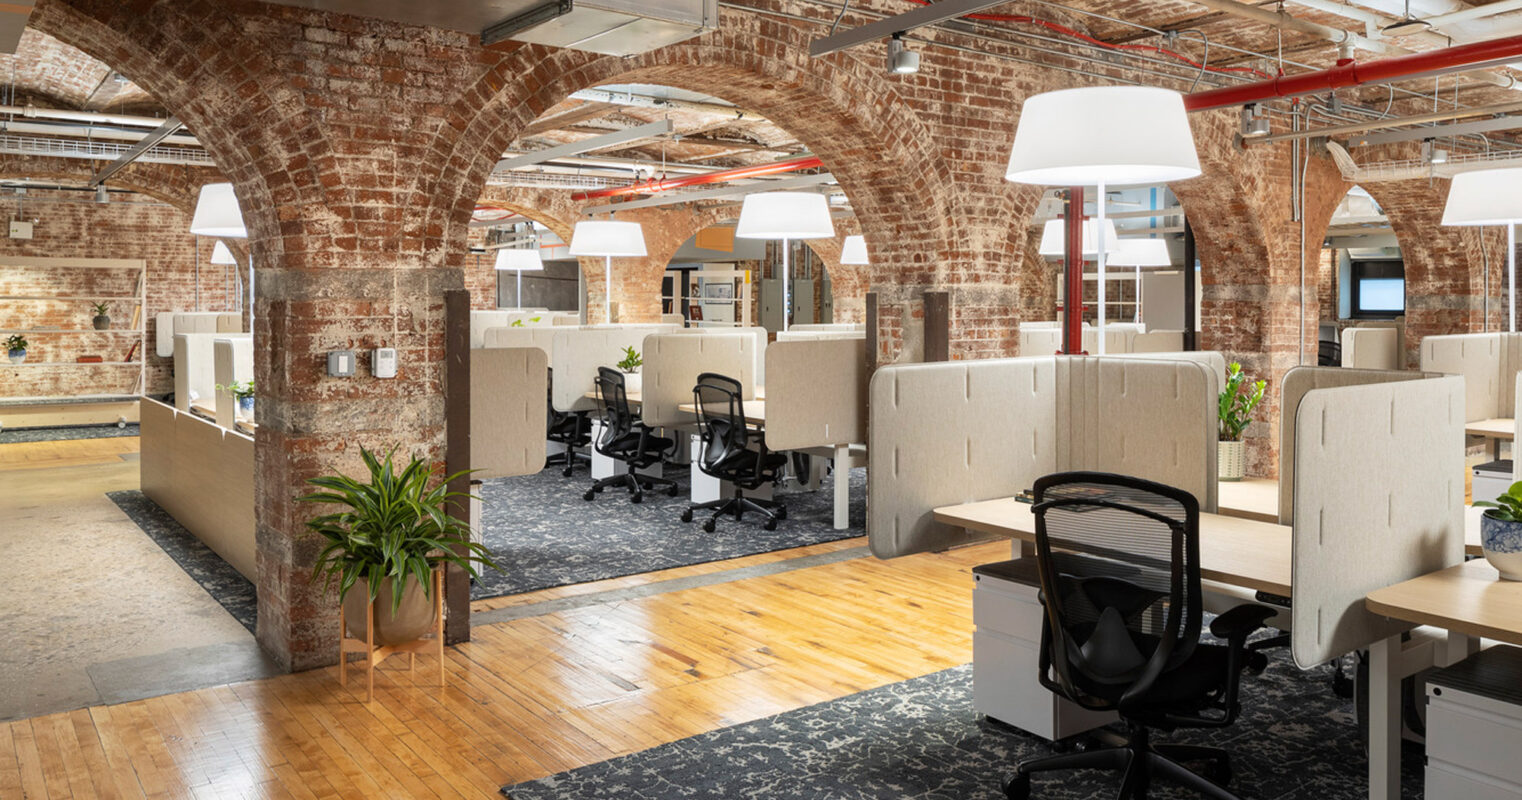 Modern workplace in a historic loft-style building with exposed brick walls and arched ceilings. Features include hardwood flooring, contemporary cubicles, pendant lighting, and strategically placed greenery, creating a fusion of industrial charm and ergonomic design.